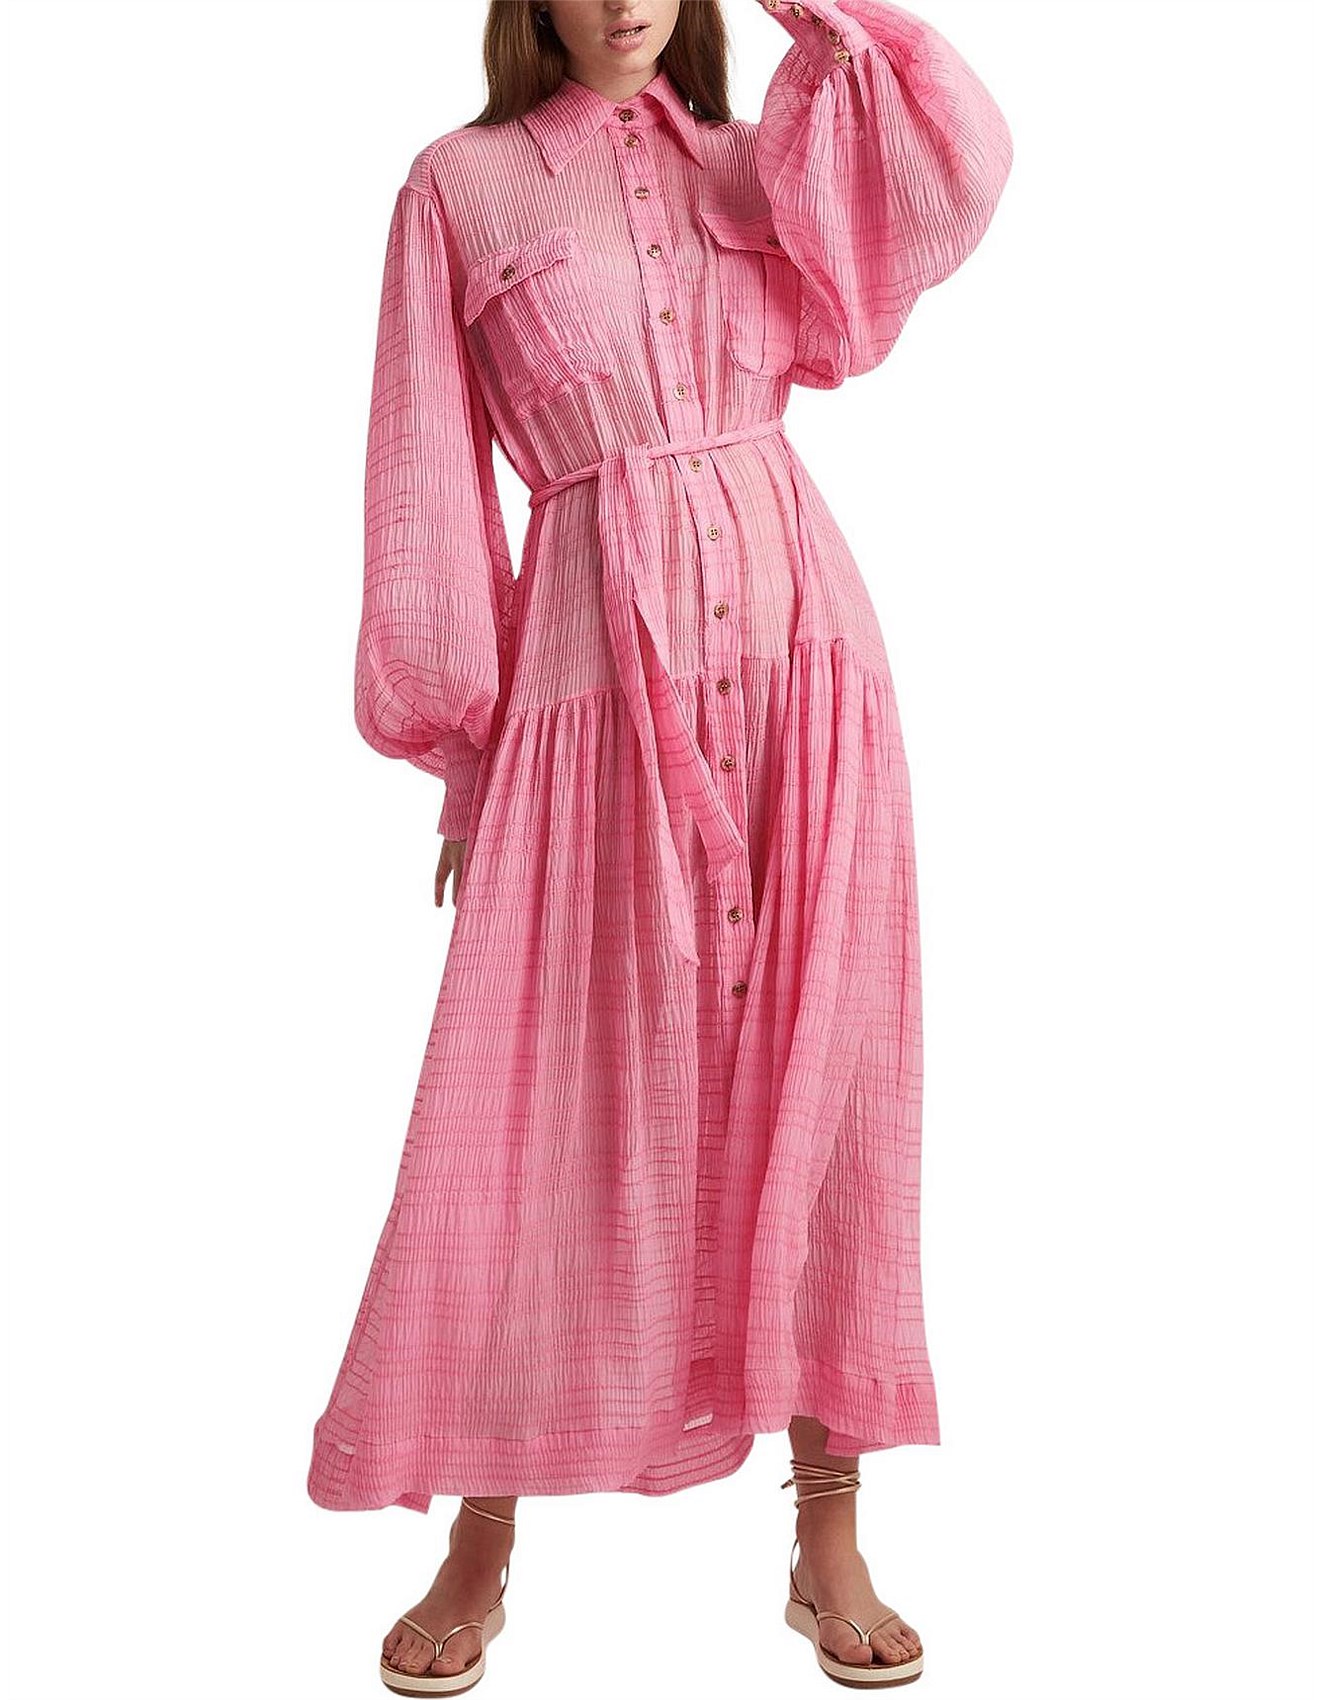 Alemais Antonella Silk Shirt Maxi Dress in pink with long sleeves.